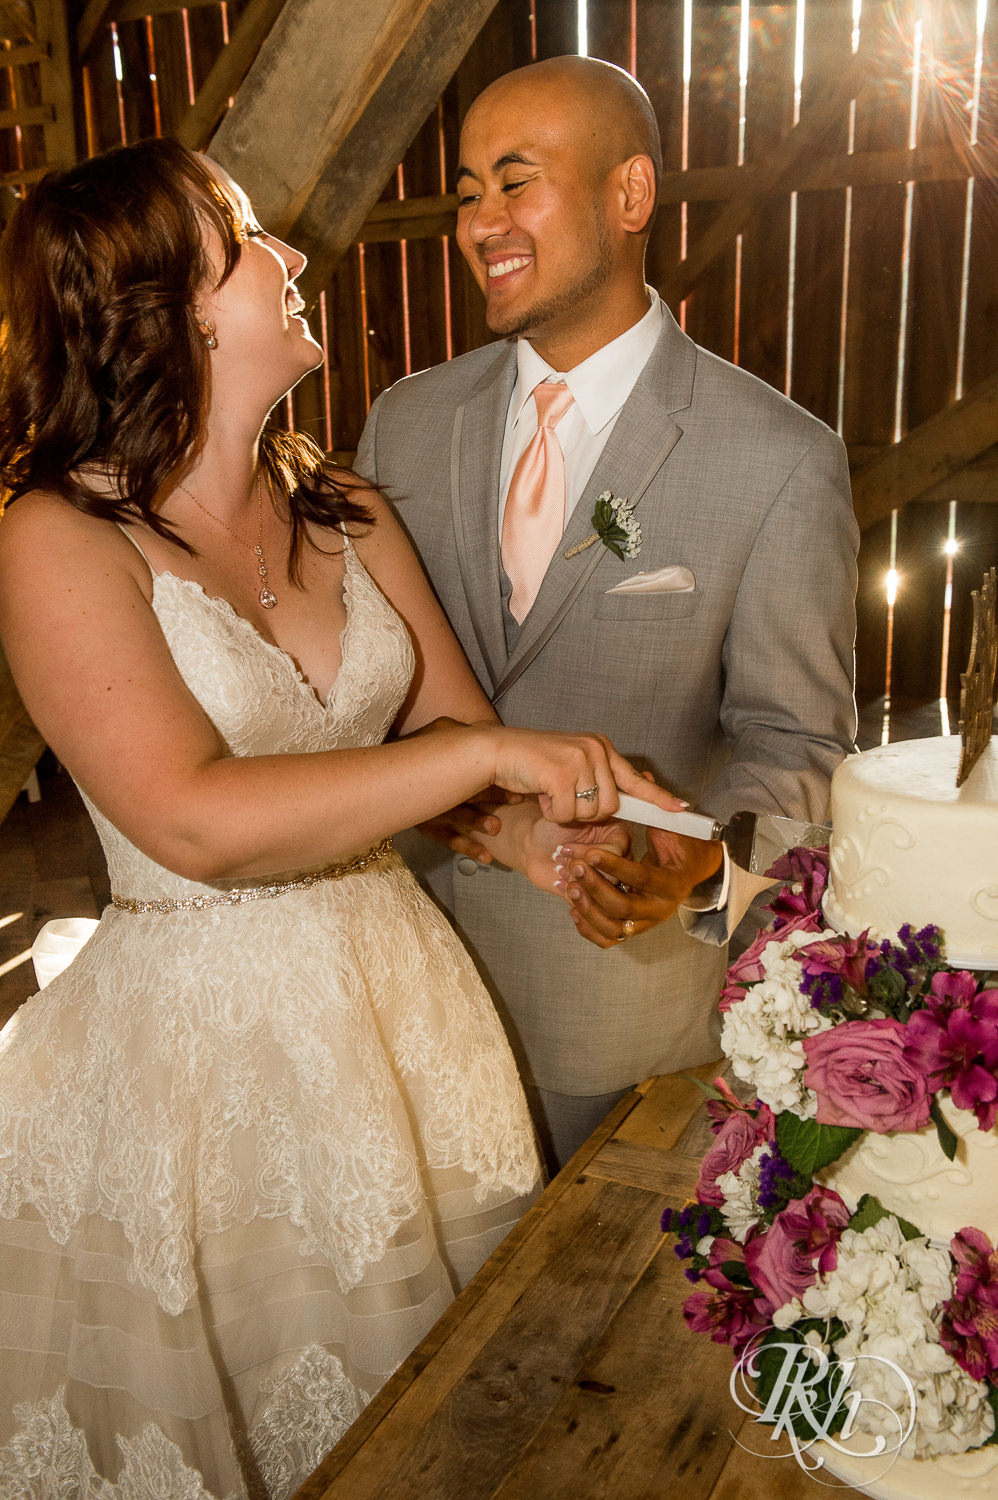 Bride and Asian groom cut cake during wedding reception at Birch Hill Barn in Glenwood City, Wisconsin.